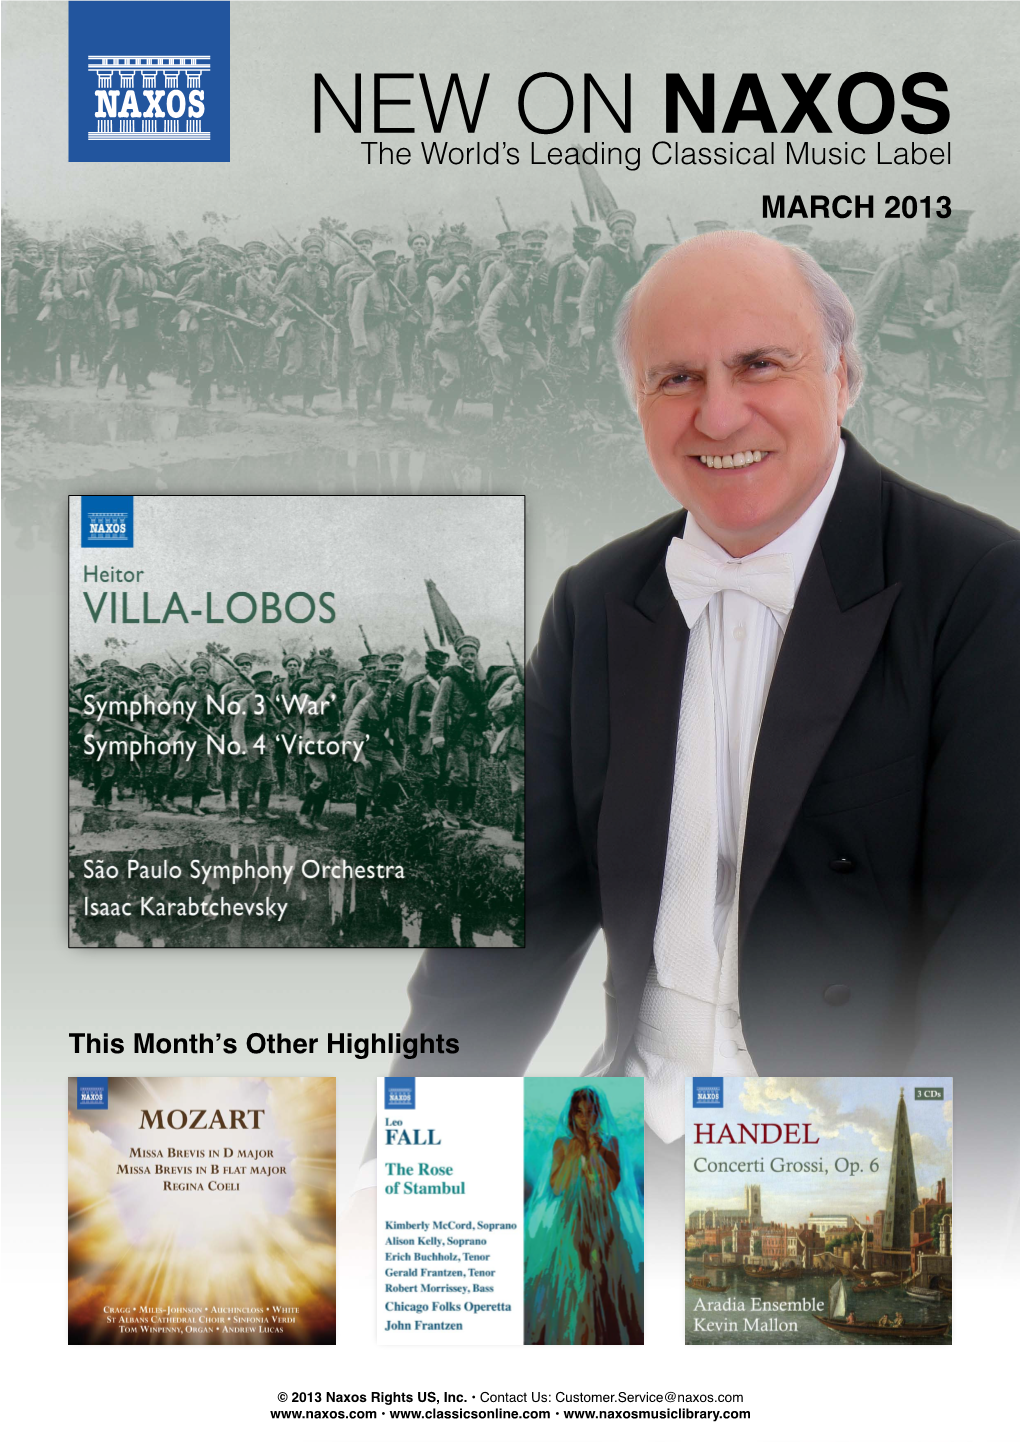 New on Naxos | MARCH 2013